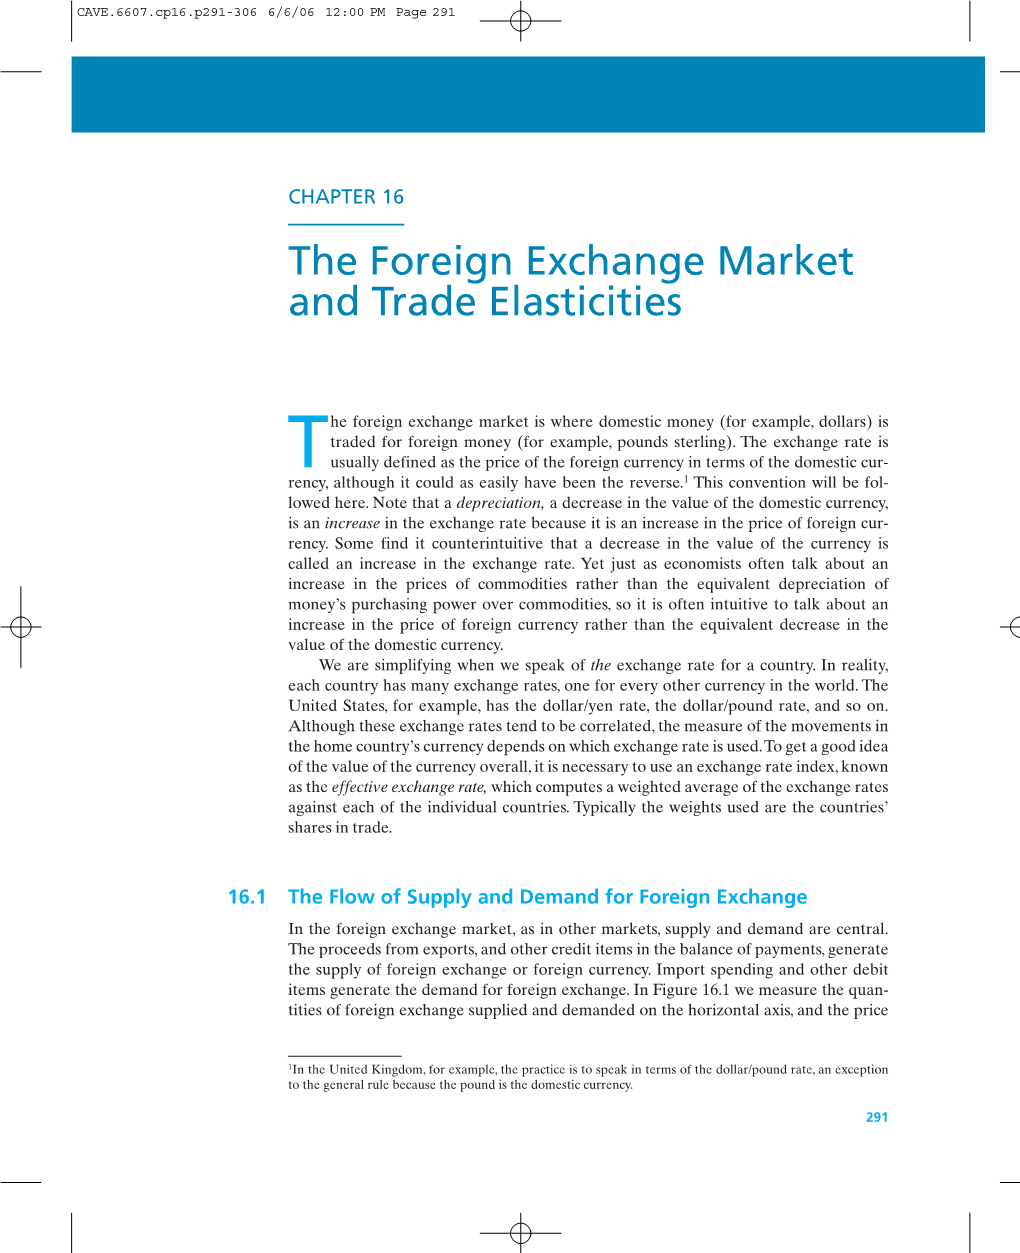 The Foreign Exchange Market and Trade Elasticities